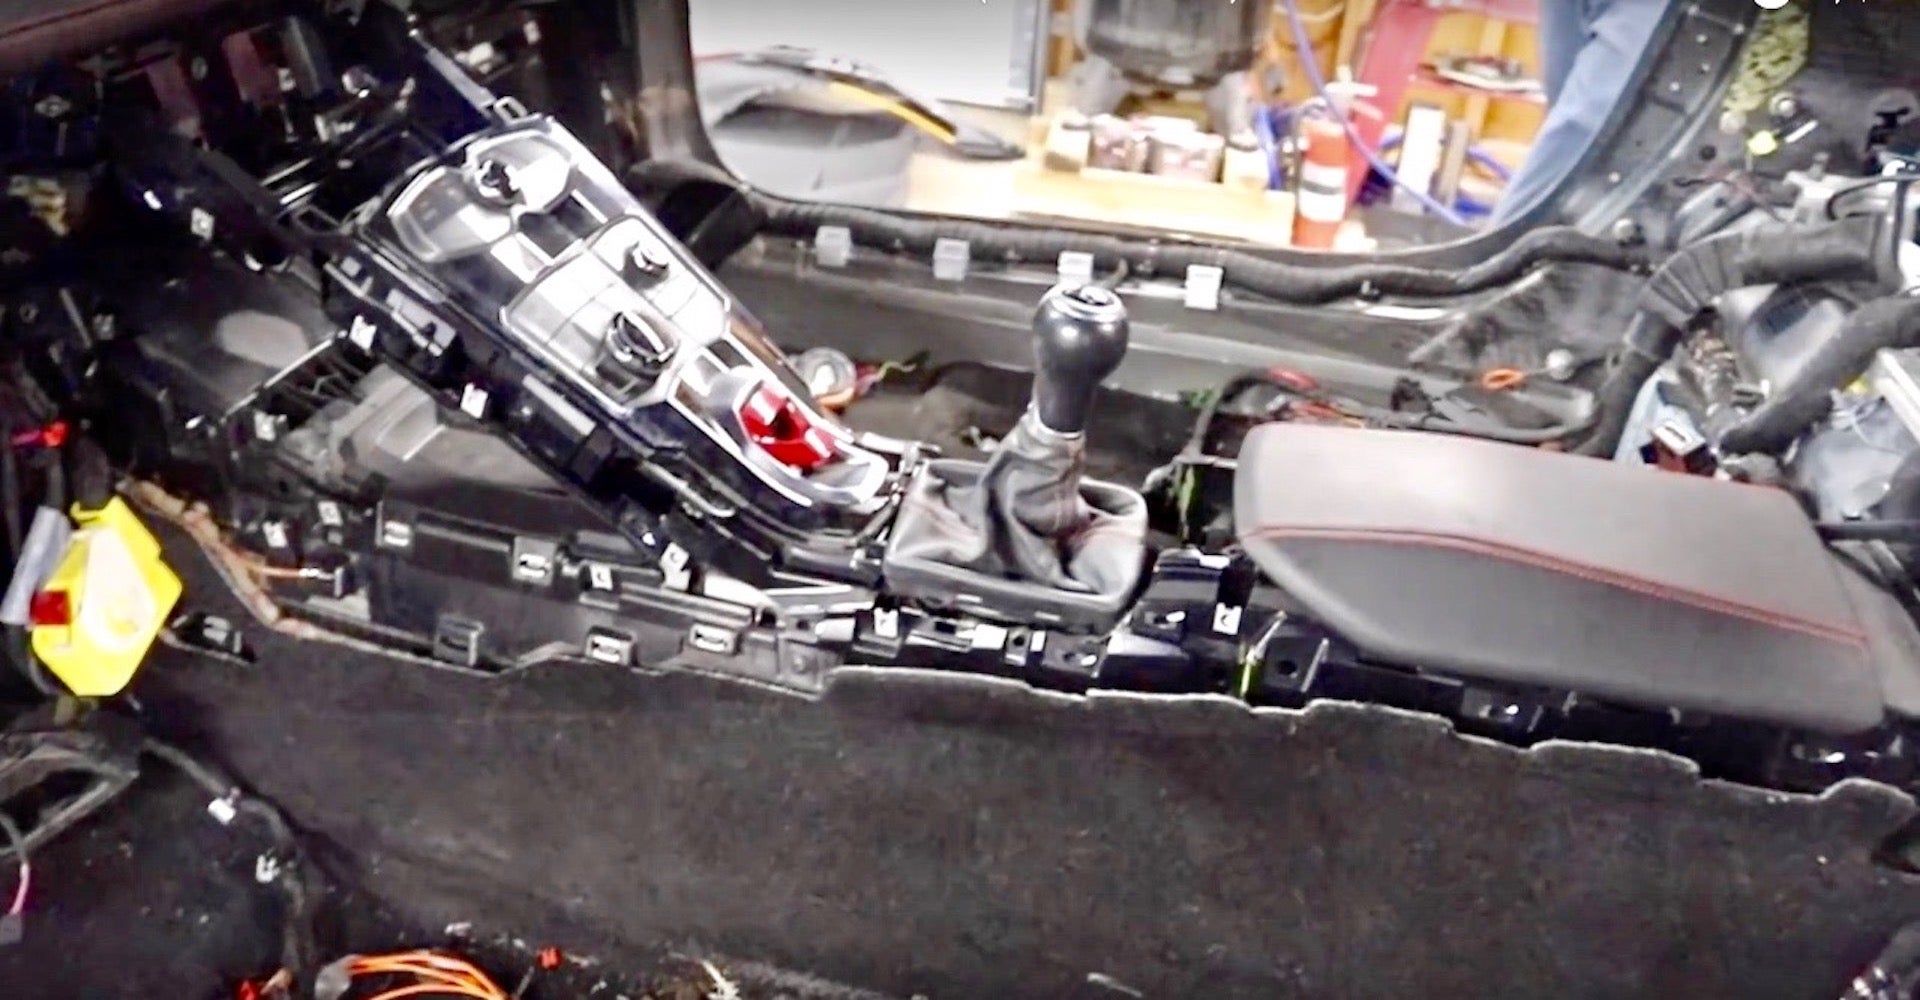 Wrenching Heroes Build World’s Only Lamborghini Huracan With Manual Transmission